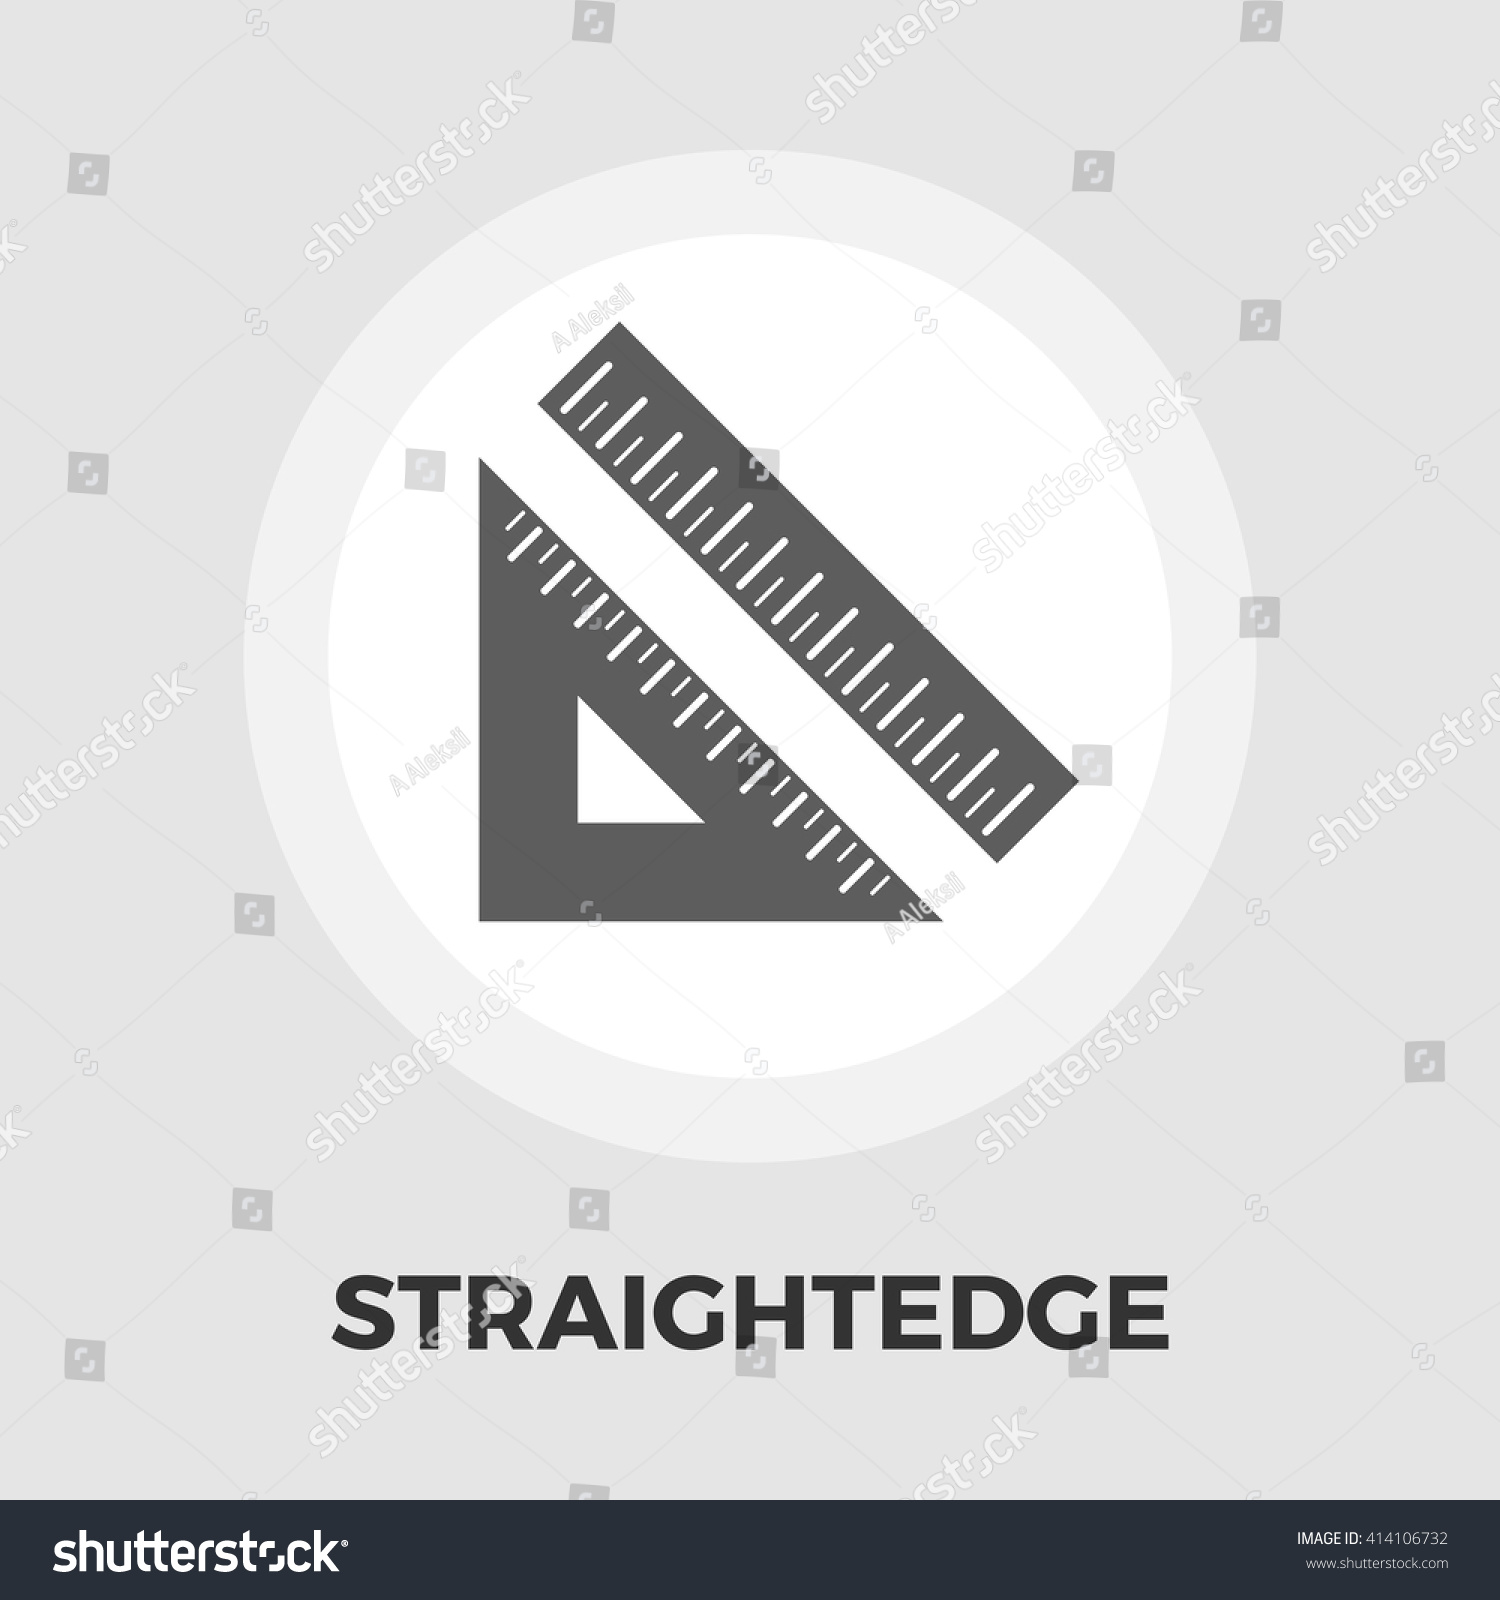 Straightedge Icon Vector Flat Icon Isolated Stock Vector 414106732